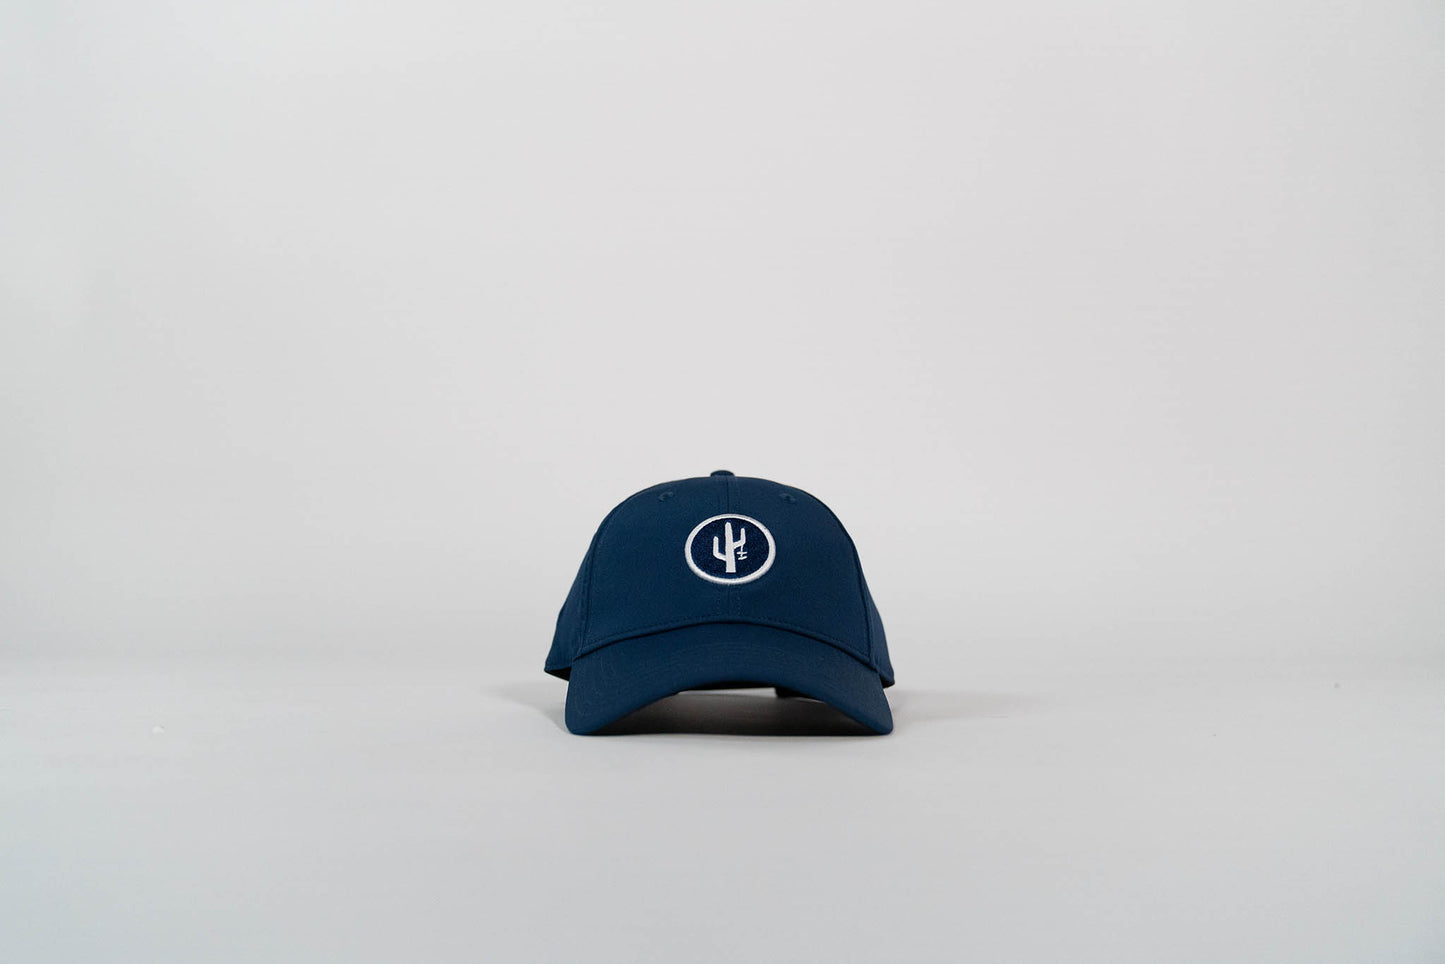 Manor X Taylor Made "Shoes on the Cactus Patch Dad Golf Hat" - Navy / White